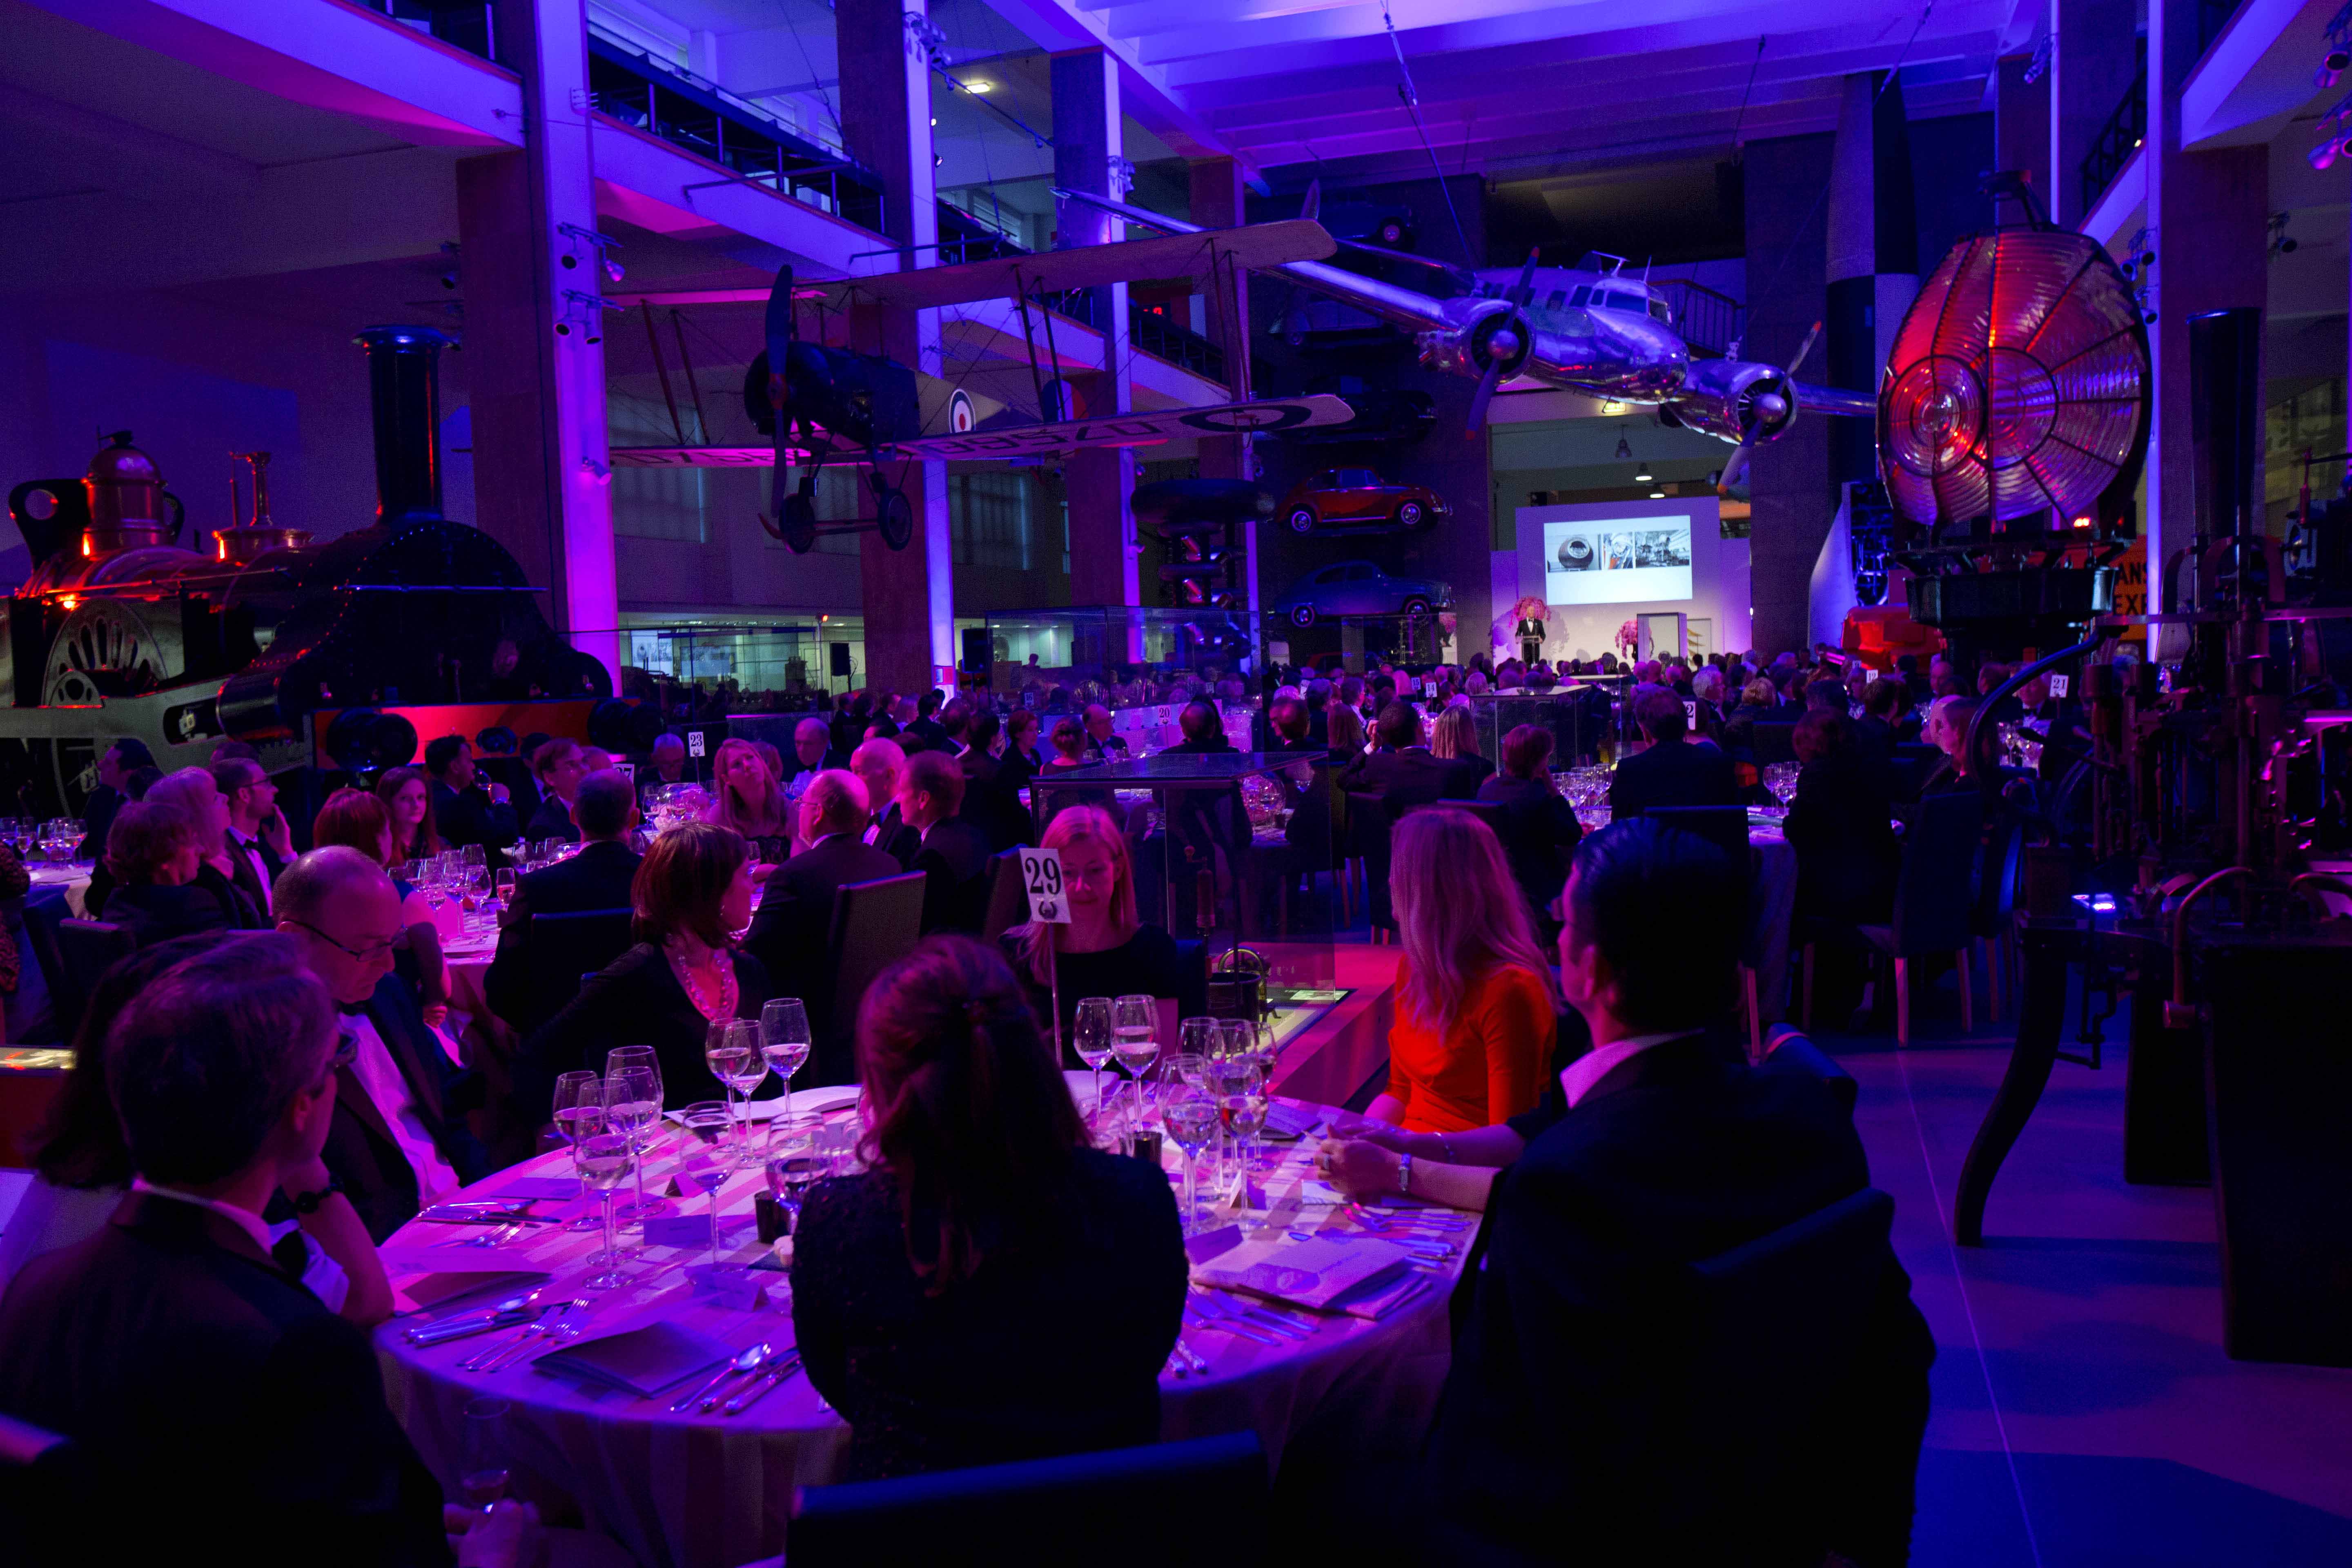 The Making the Modern World gallery hosts the 2014 Science Museum Director's Annual Dinner © Tim Anderson